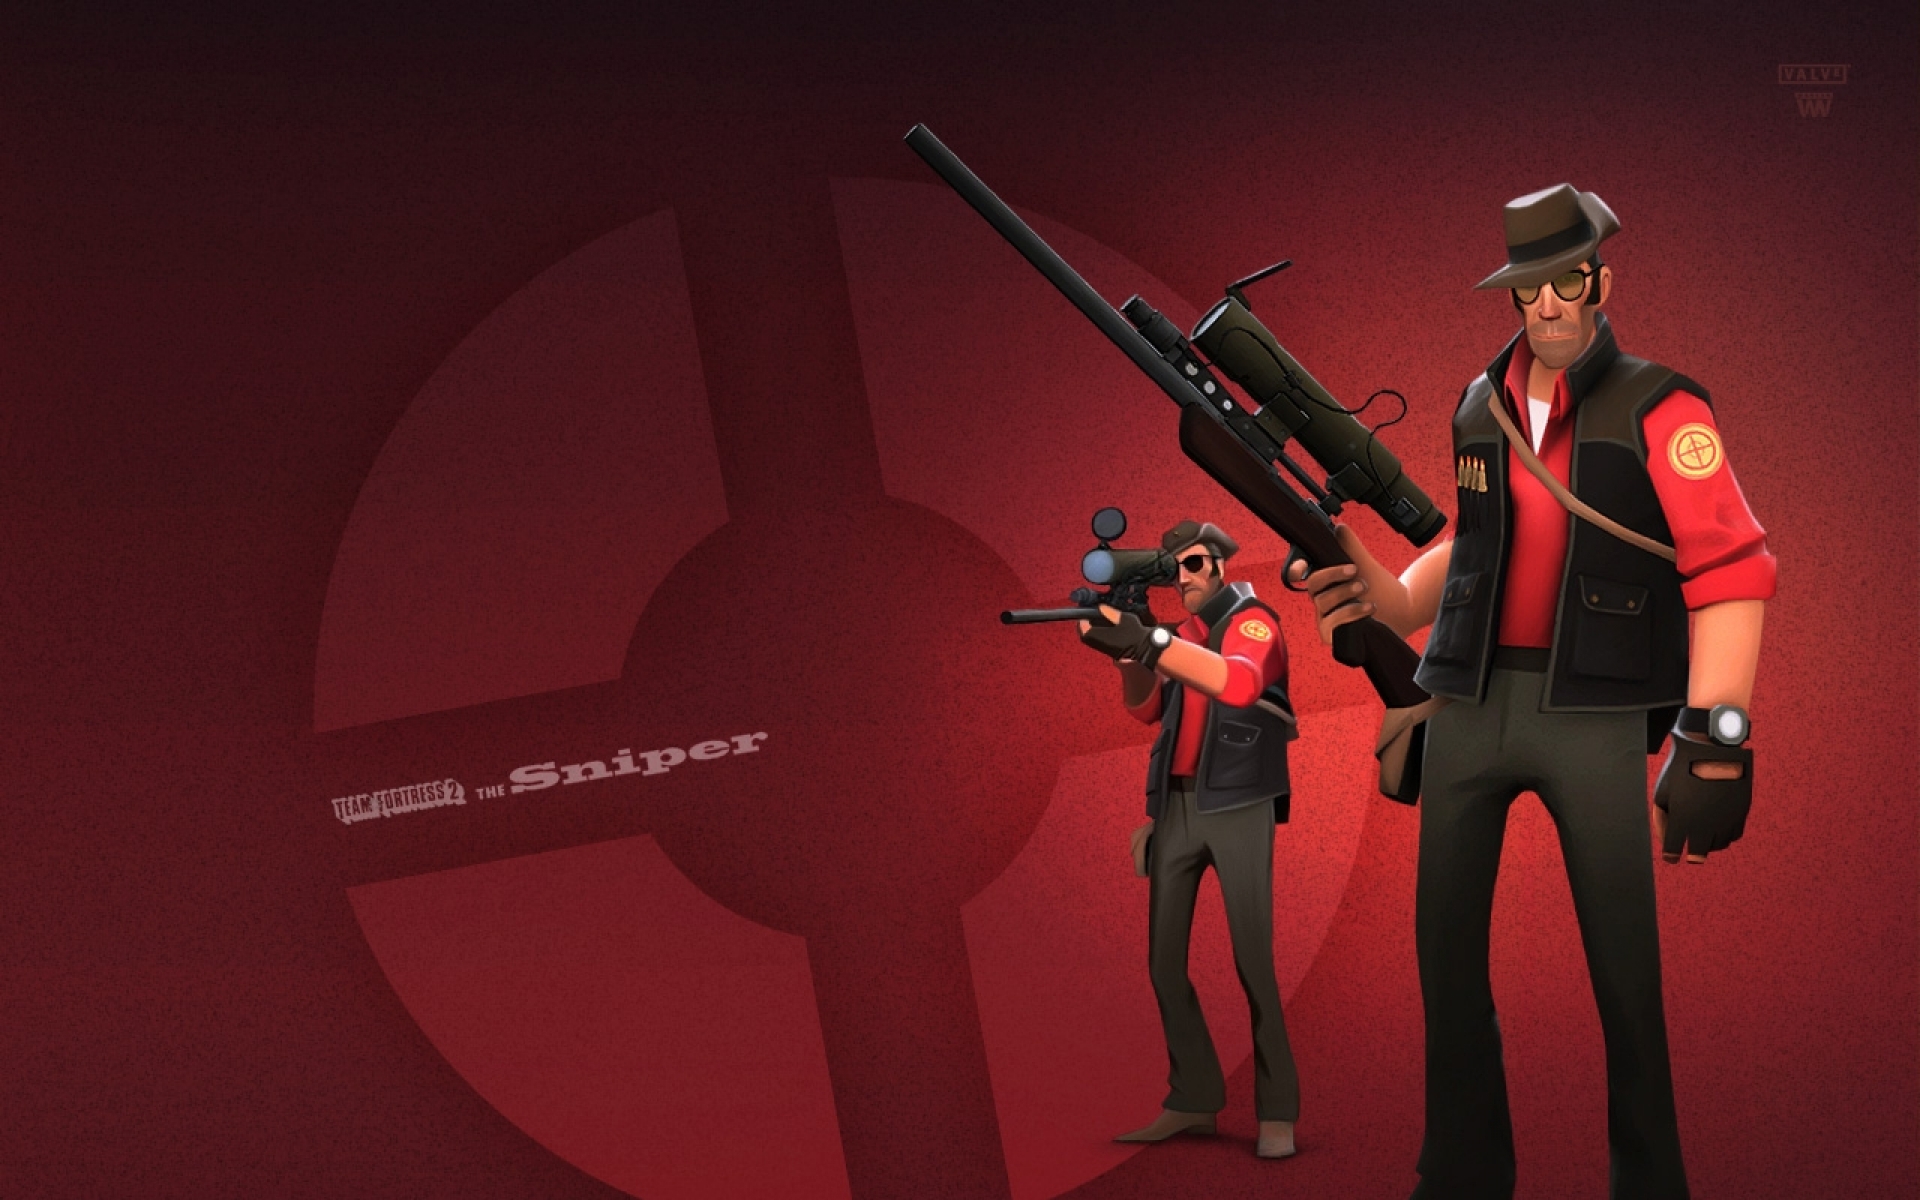 Team Fortress 2 Wallpapers | Best Wallpapers